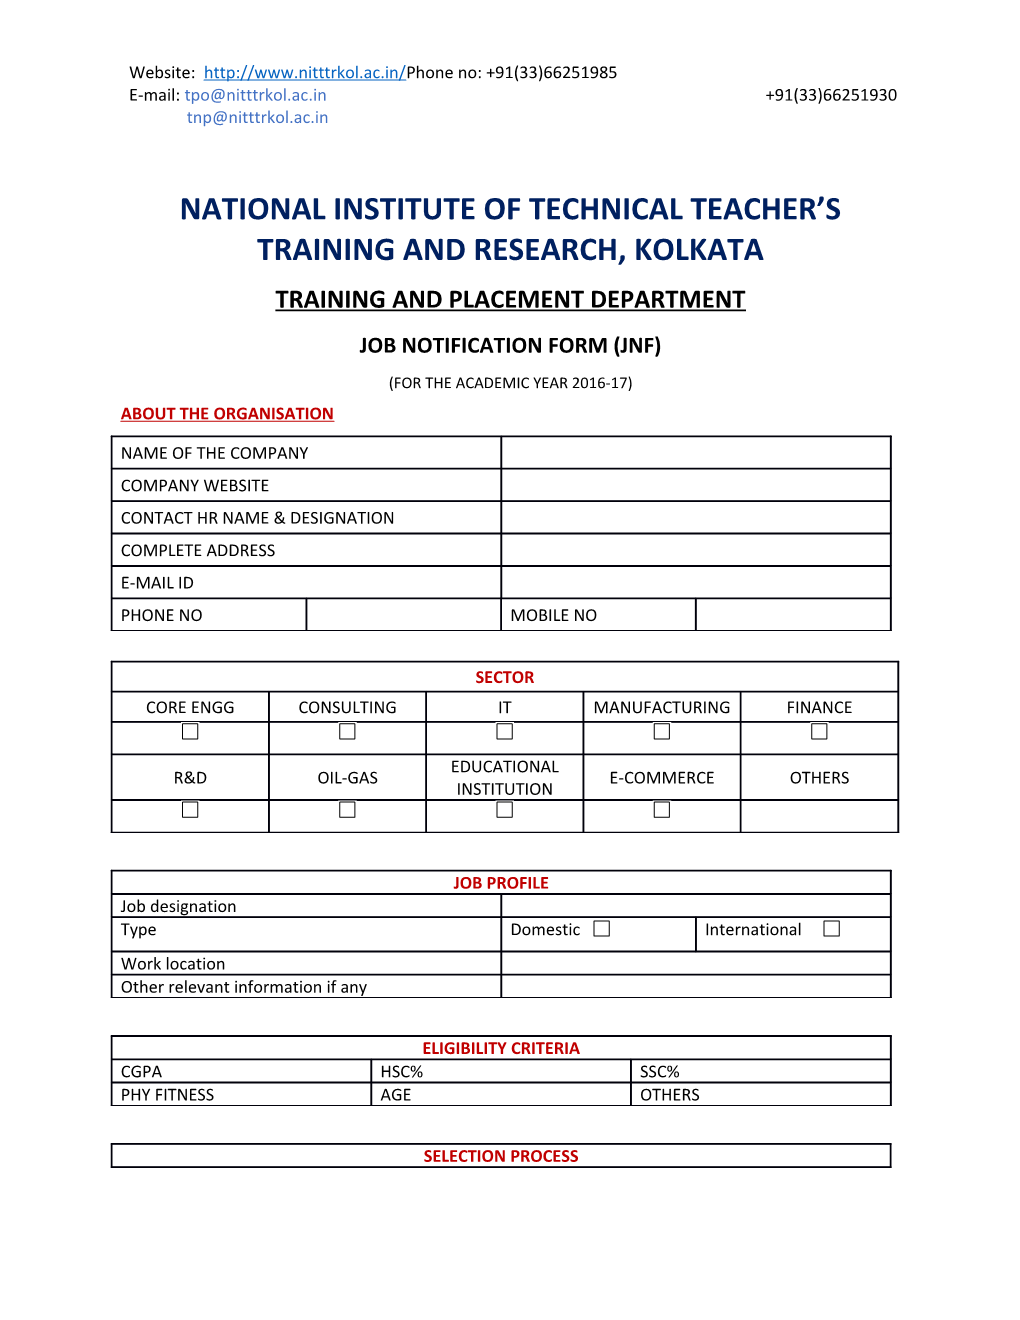 National Institute of Technical Teacher S Training and Research, Kolkata